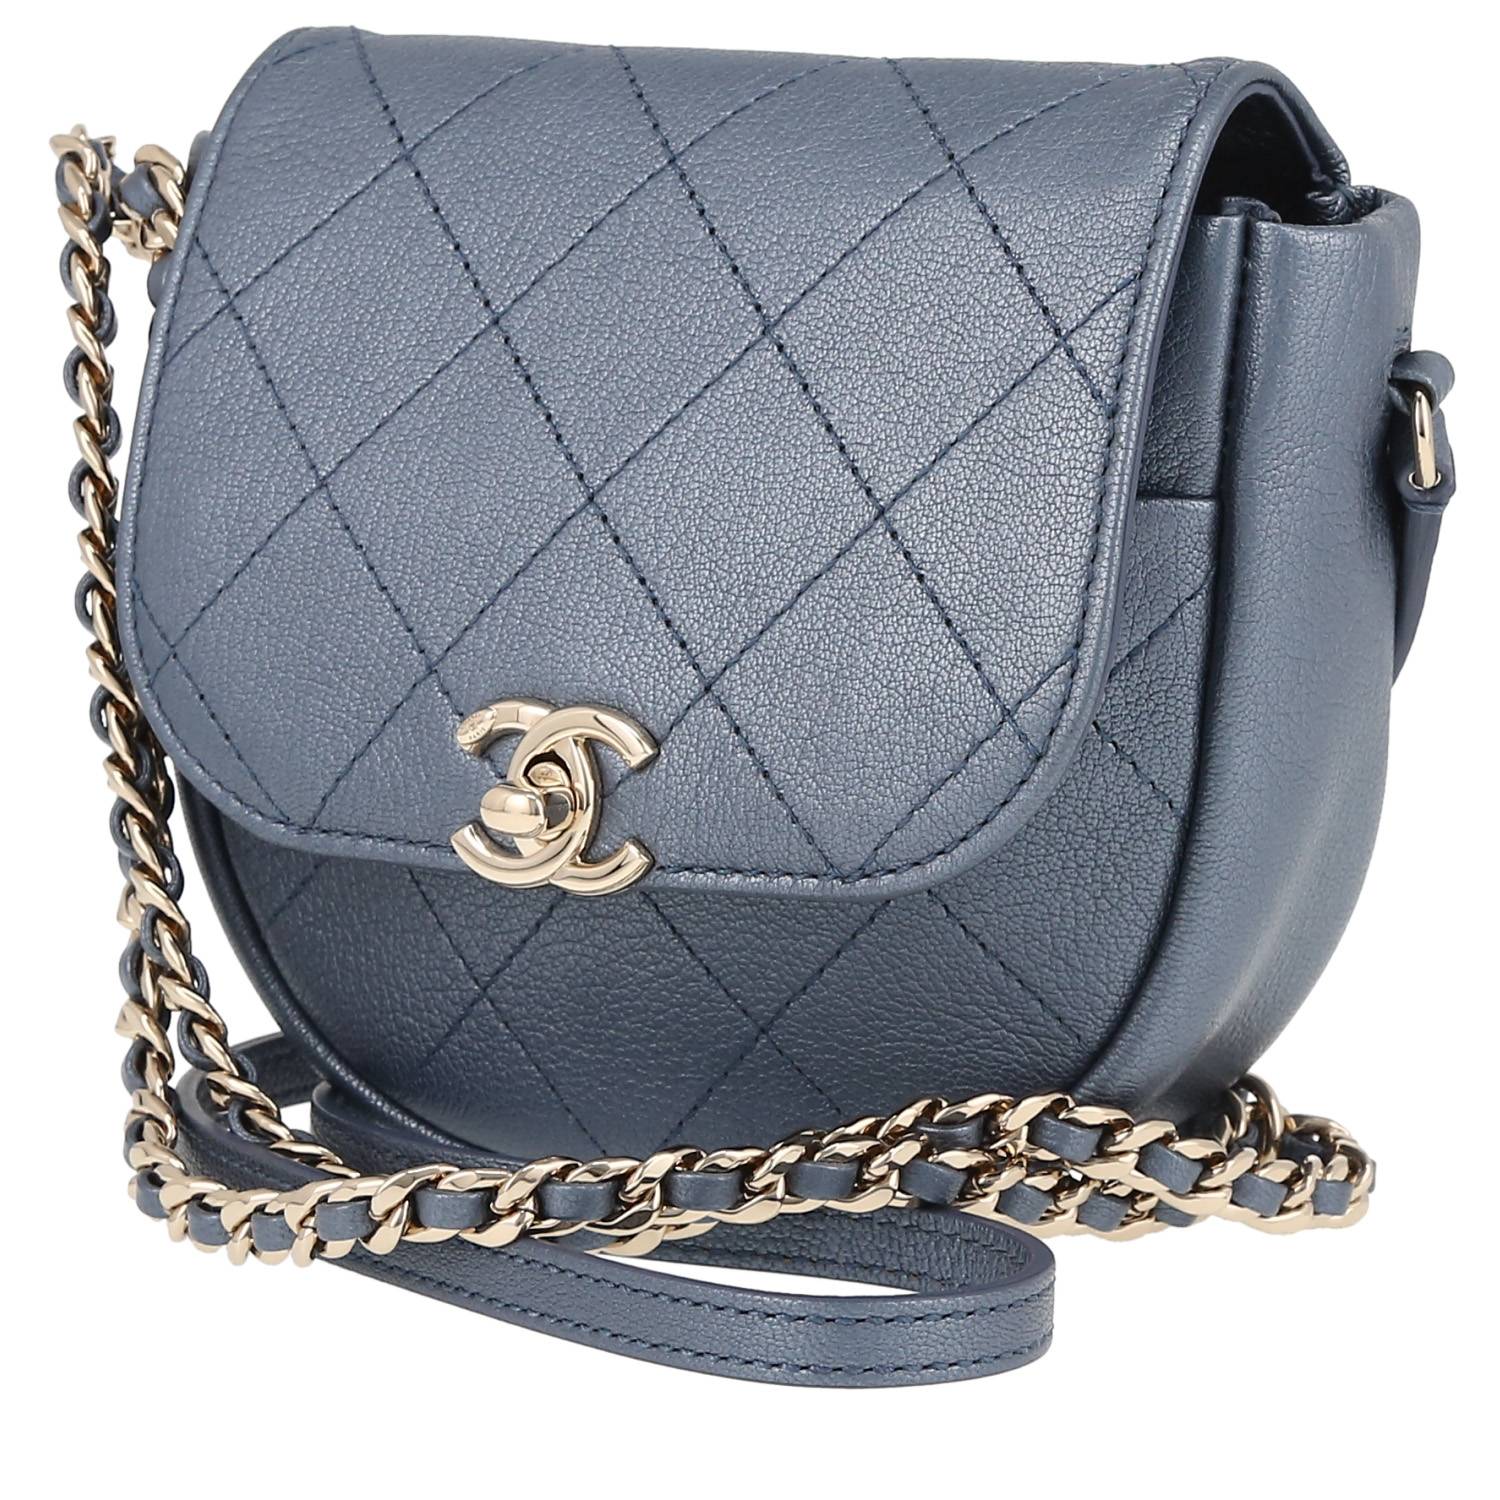 Chanel Small Model Shoulder Bag in Blue Quilted Leather